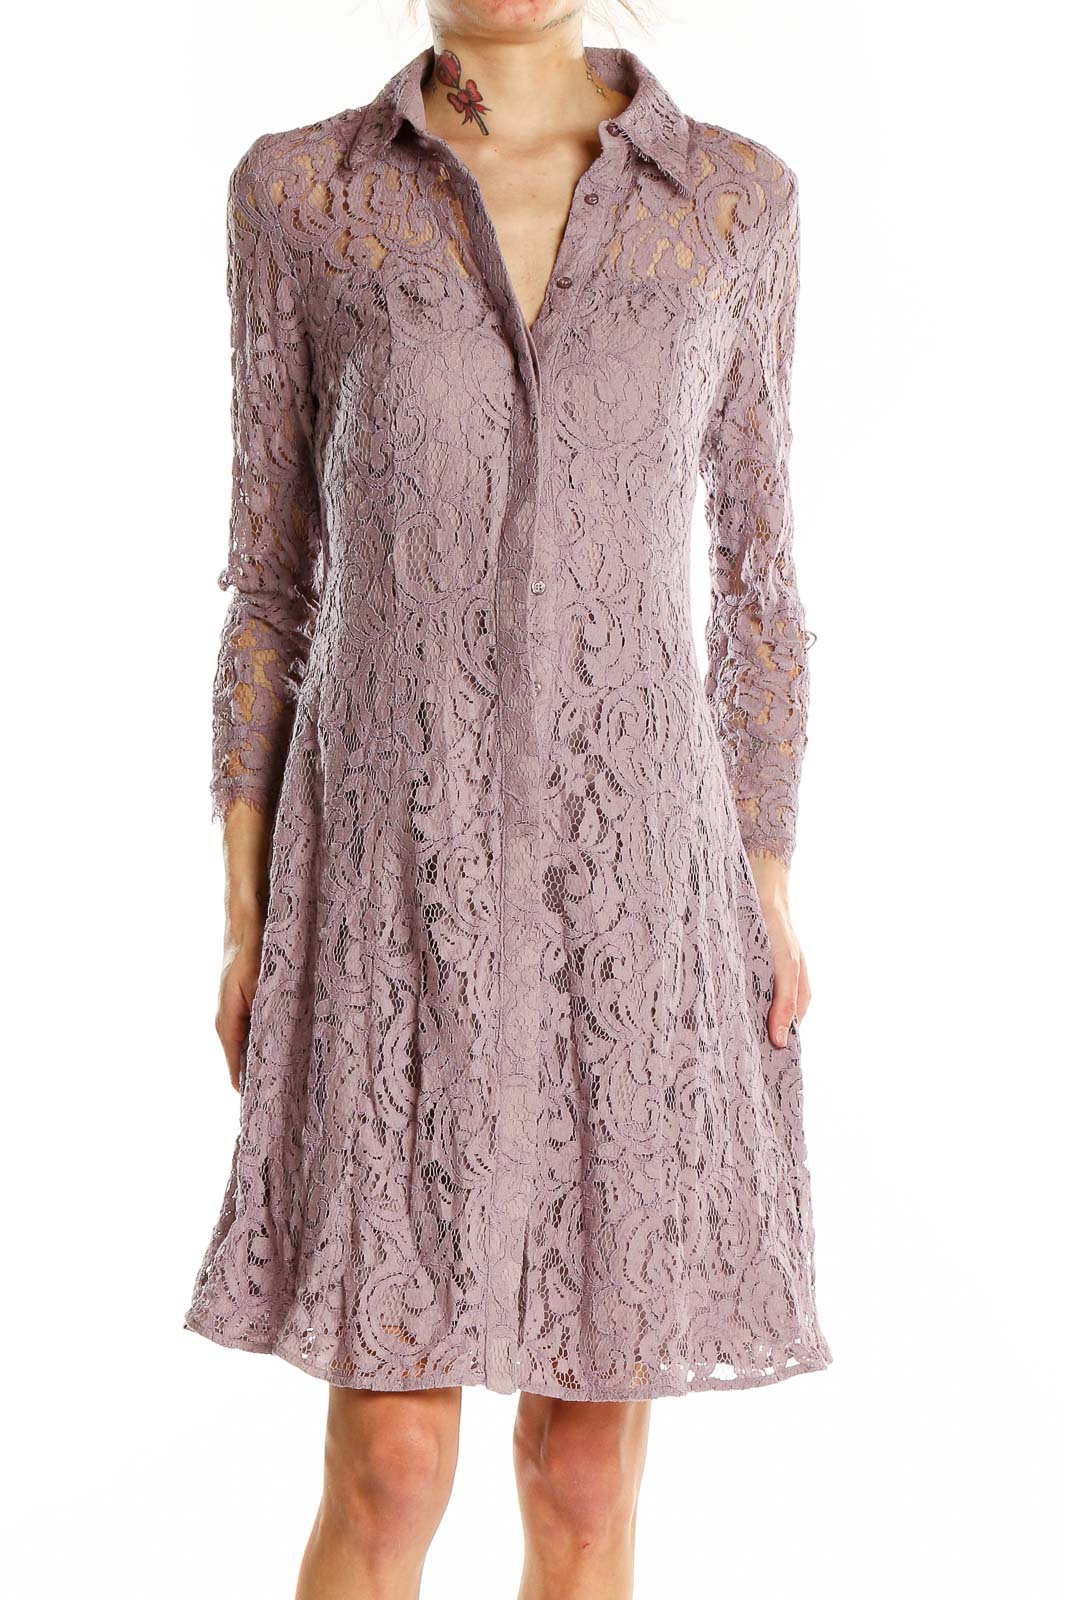 Purple Flare Lace Collared Dress Front